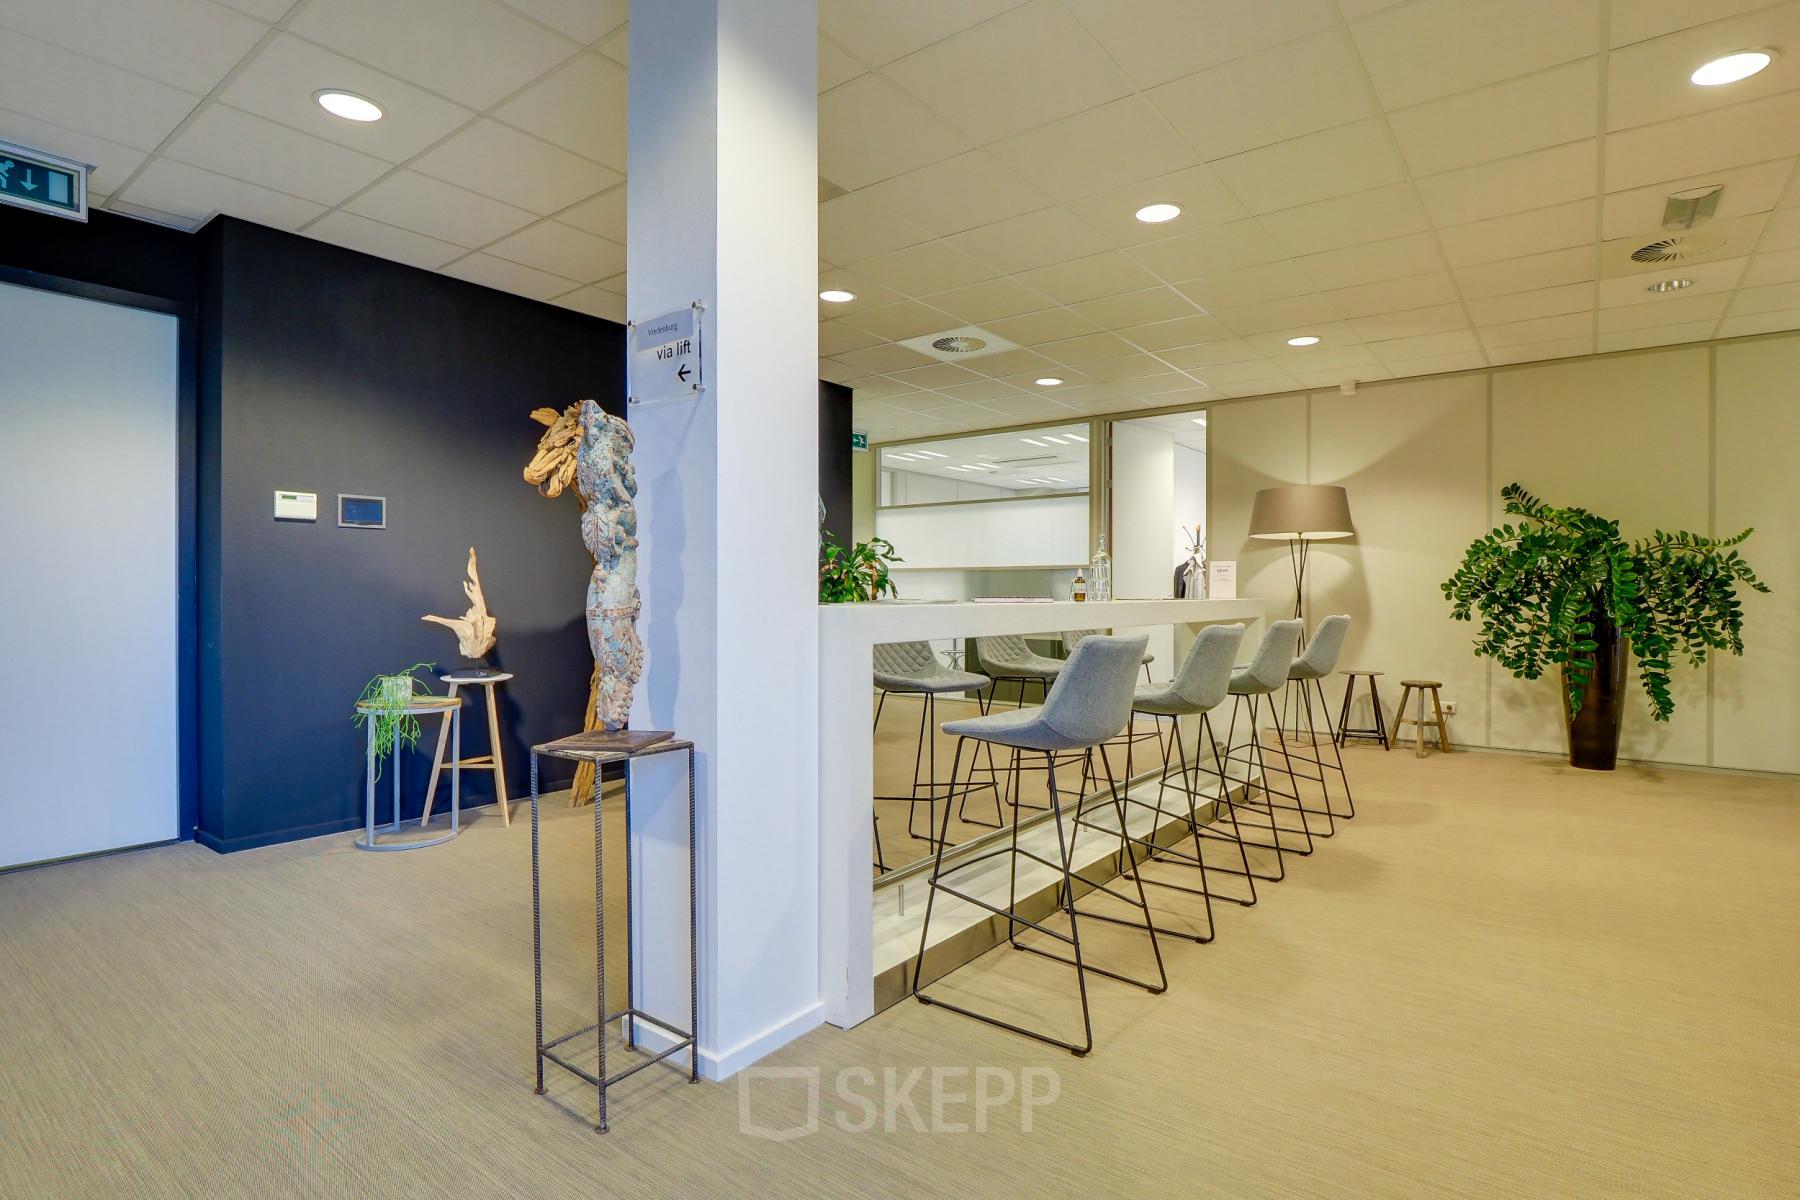 Modern office space rental at Orteliuslaan 850, Utrecht Papendorp, featuring stylish high stools and communal bar table for collaborative work.